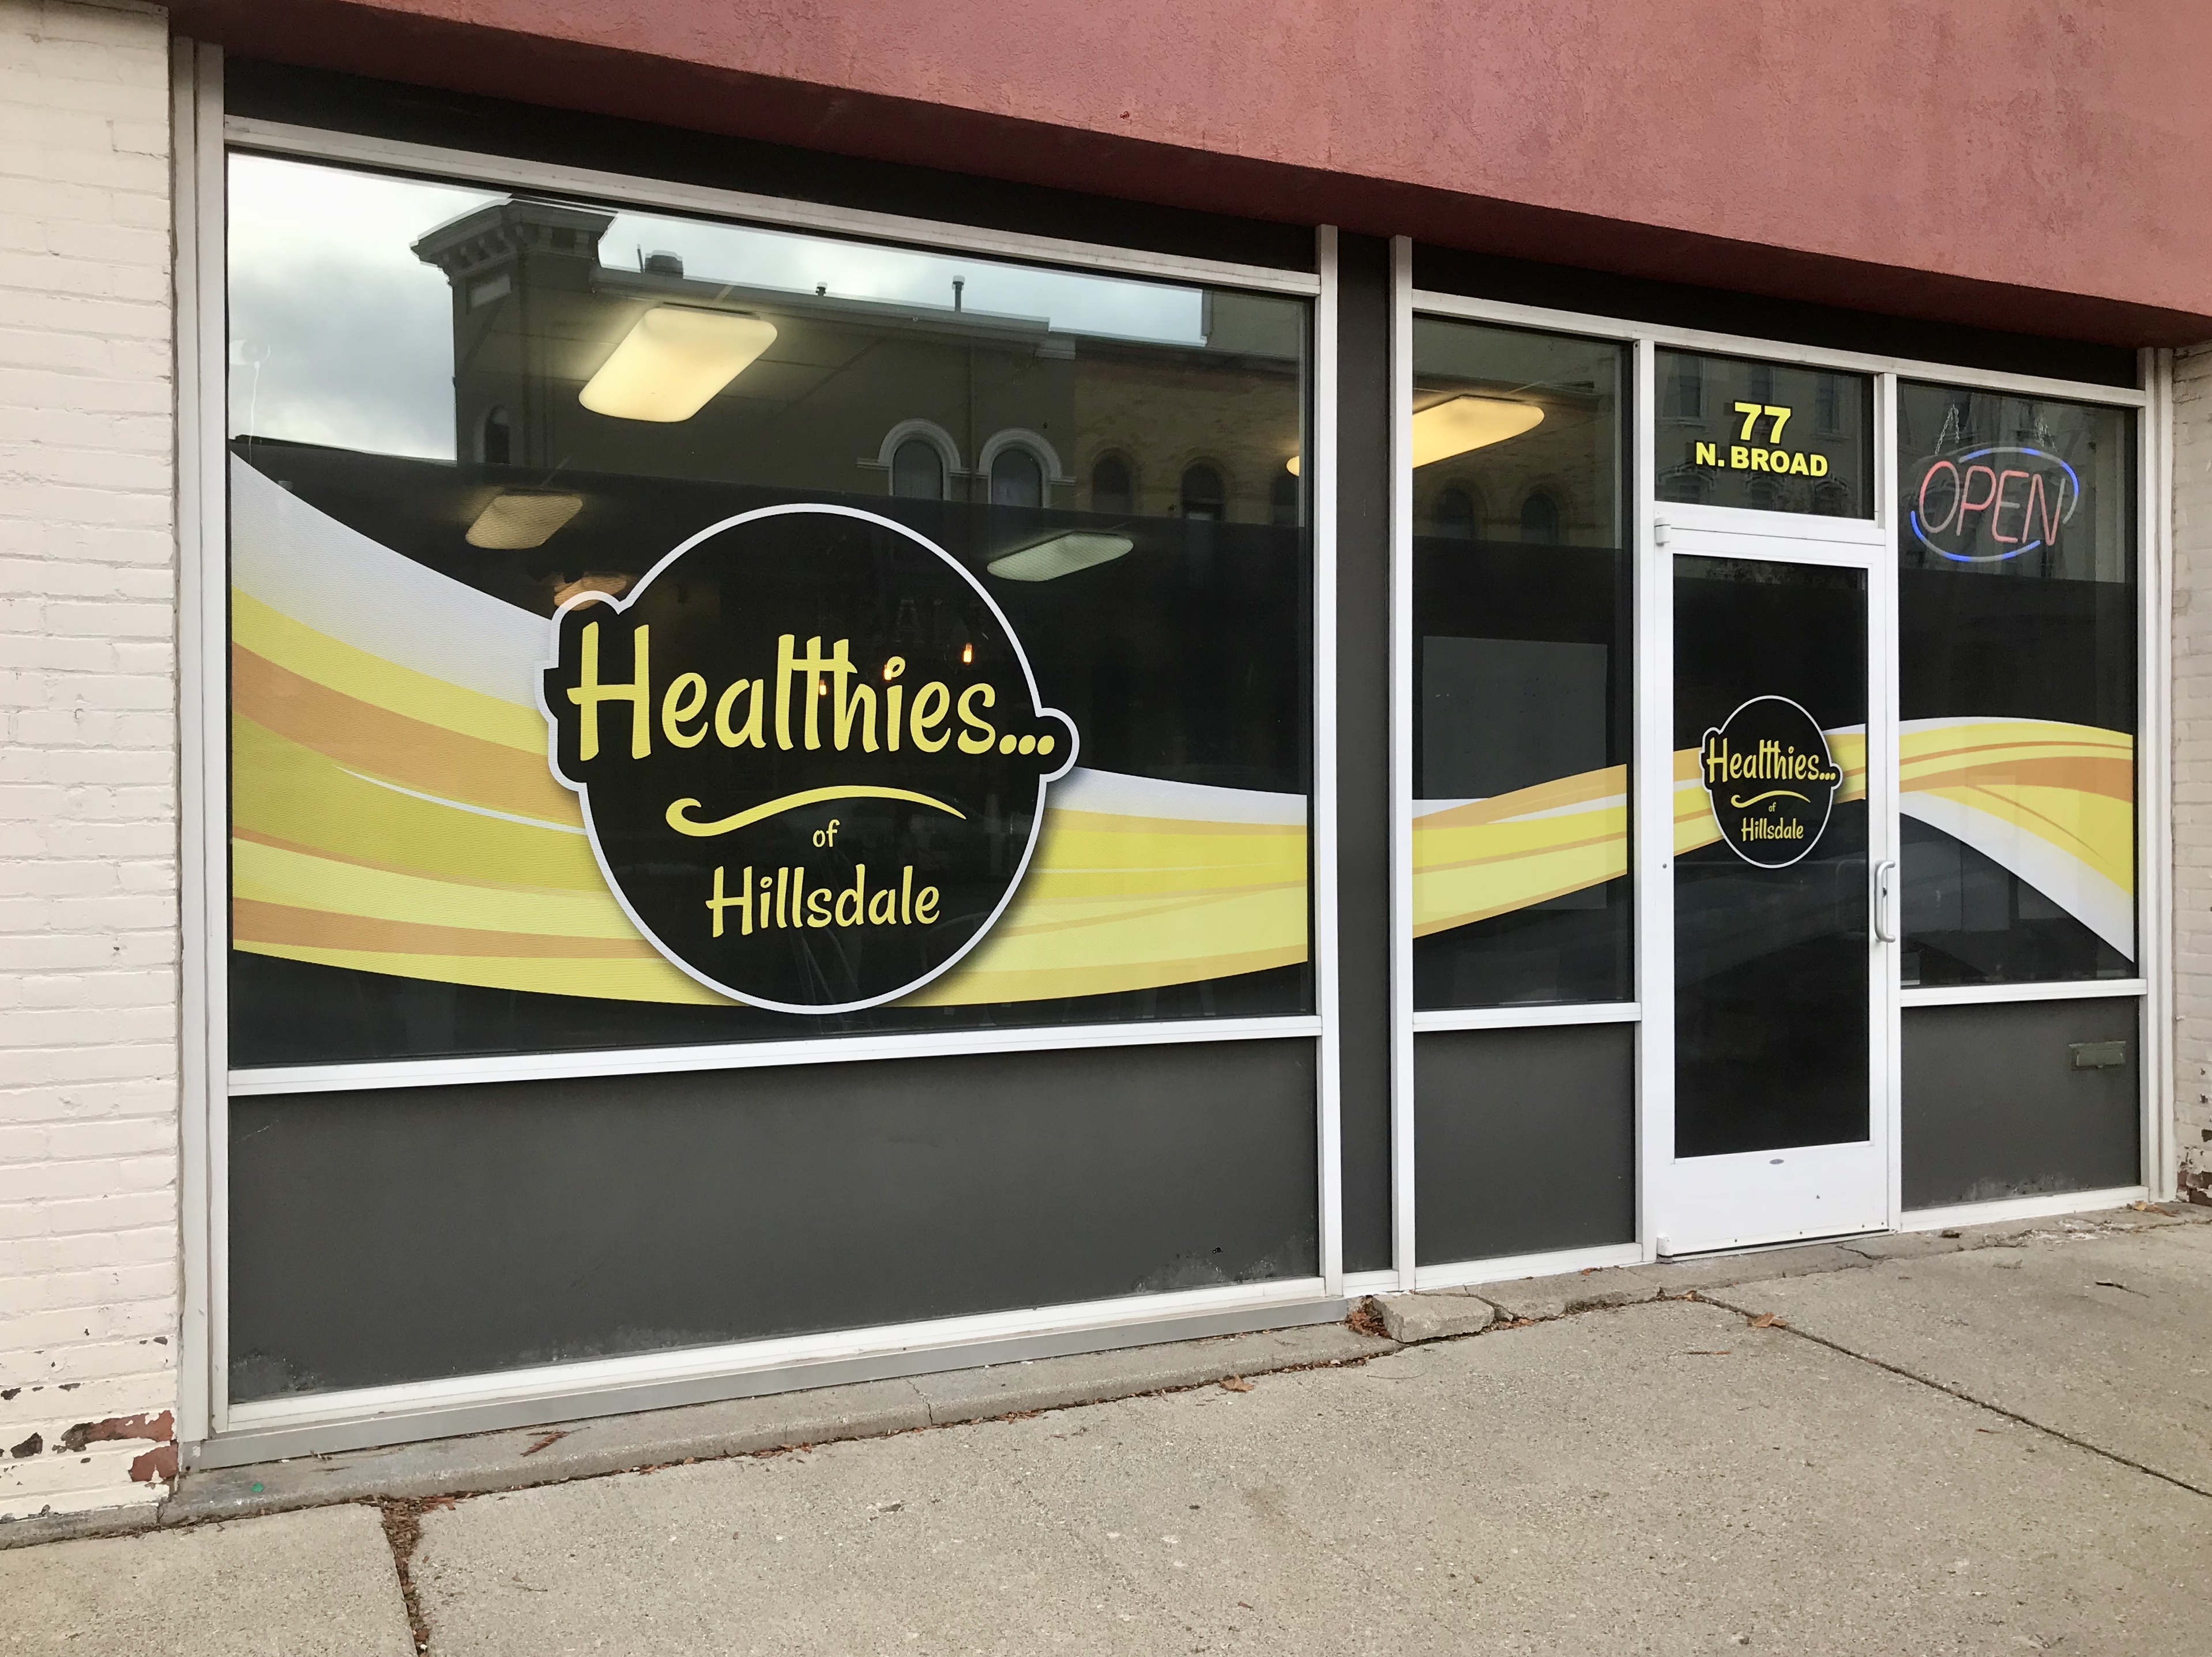 Healthies will hold its monthly community cooking class on Dec. 2